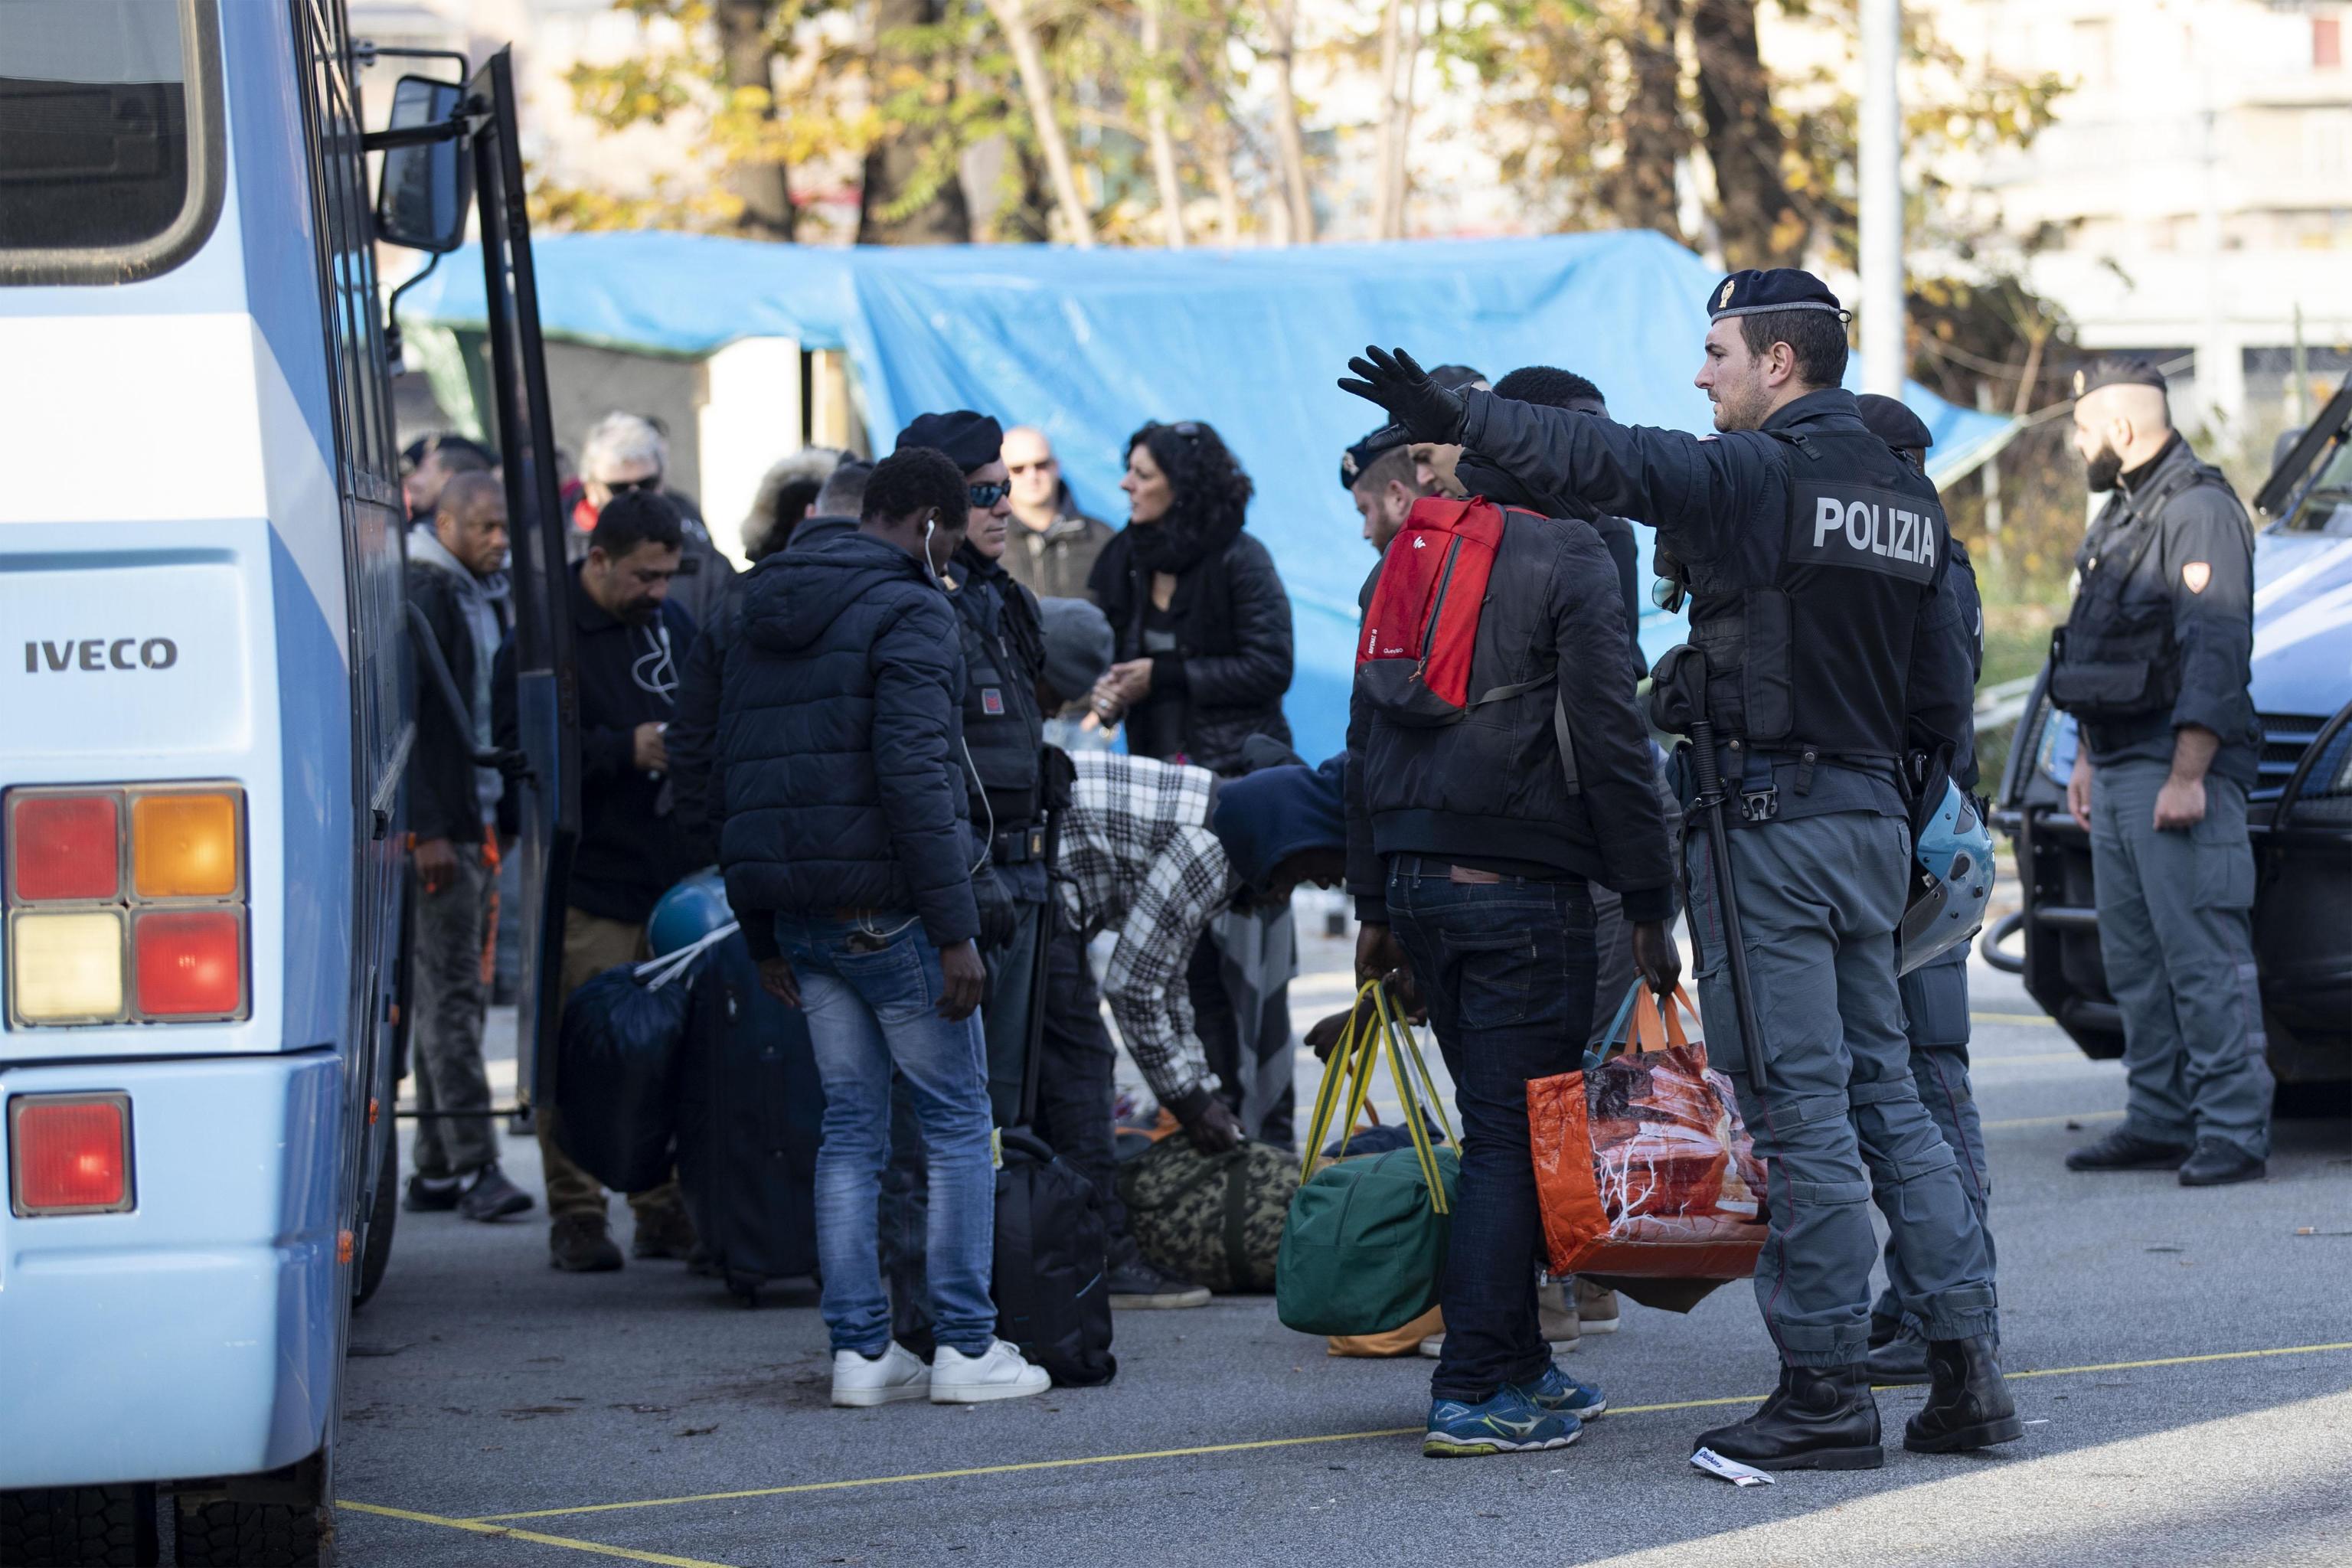 A camp run by volunteers providing food and shelter to migrants near to Rome's Tiburtina railway station was cleared by the authorities on Tuesday, 13 November 2018. Around 200 migrants were in the Baobab Experience camp before the eviction. ANSA/MASSIMO PERCOSSI